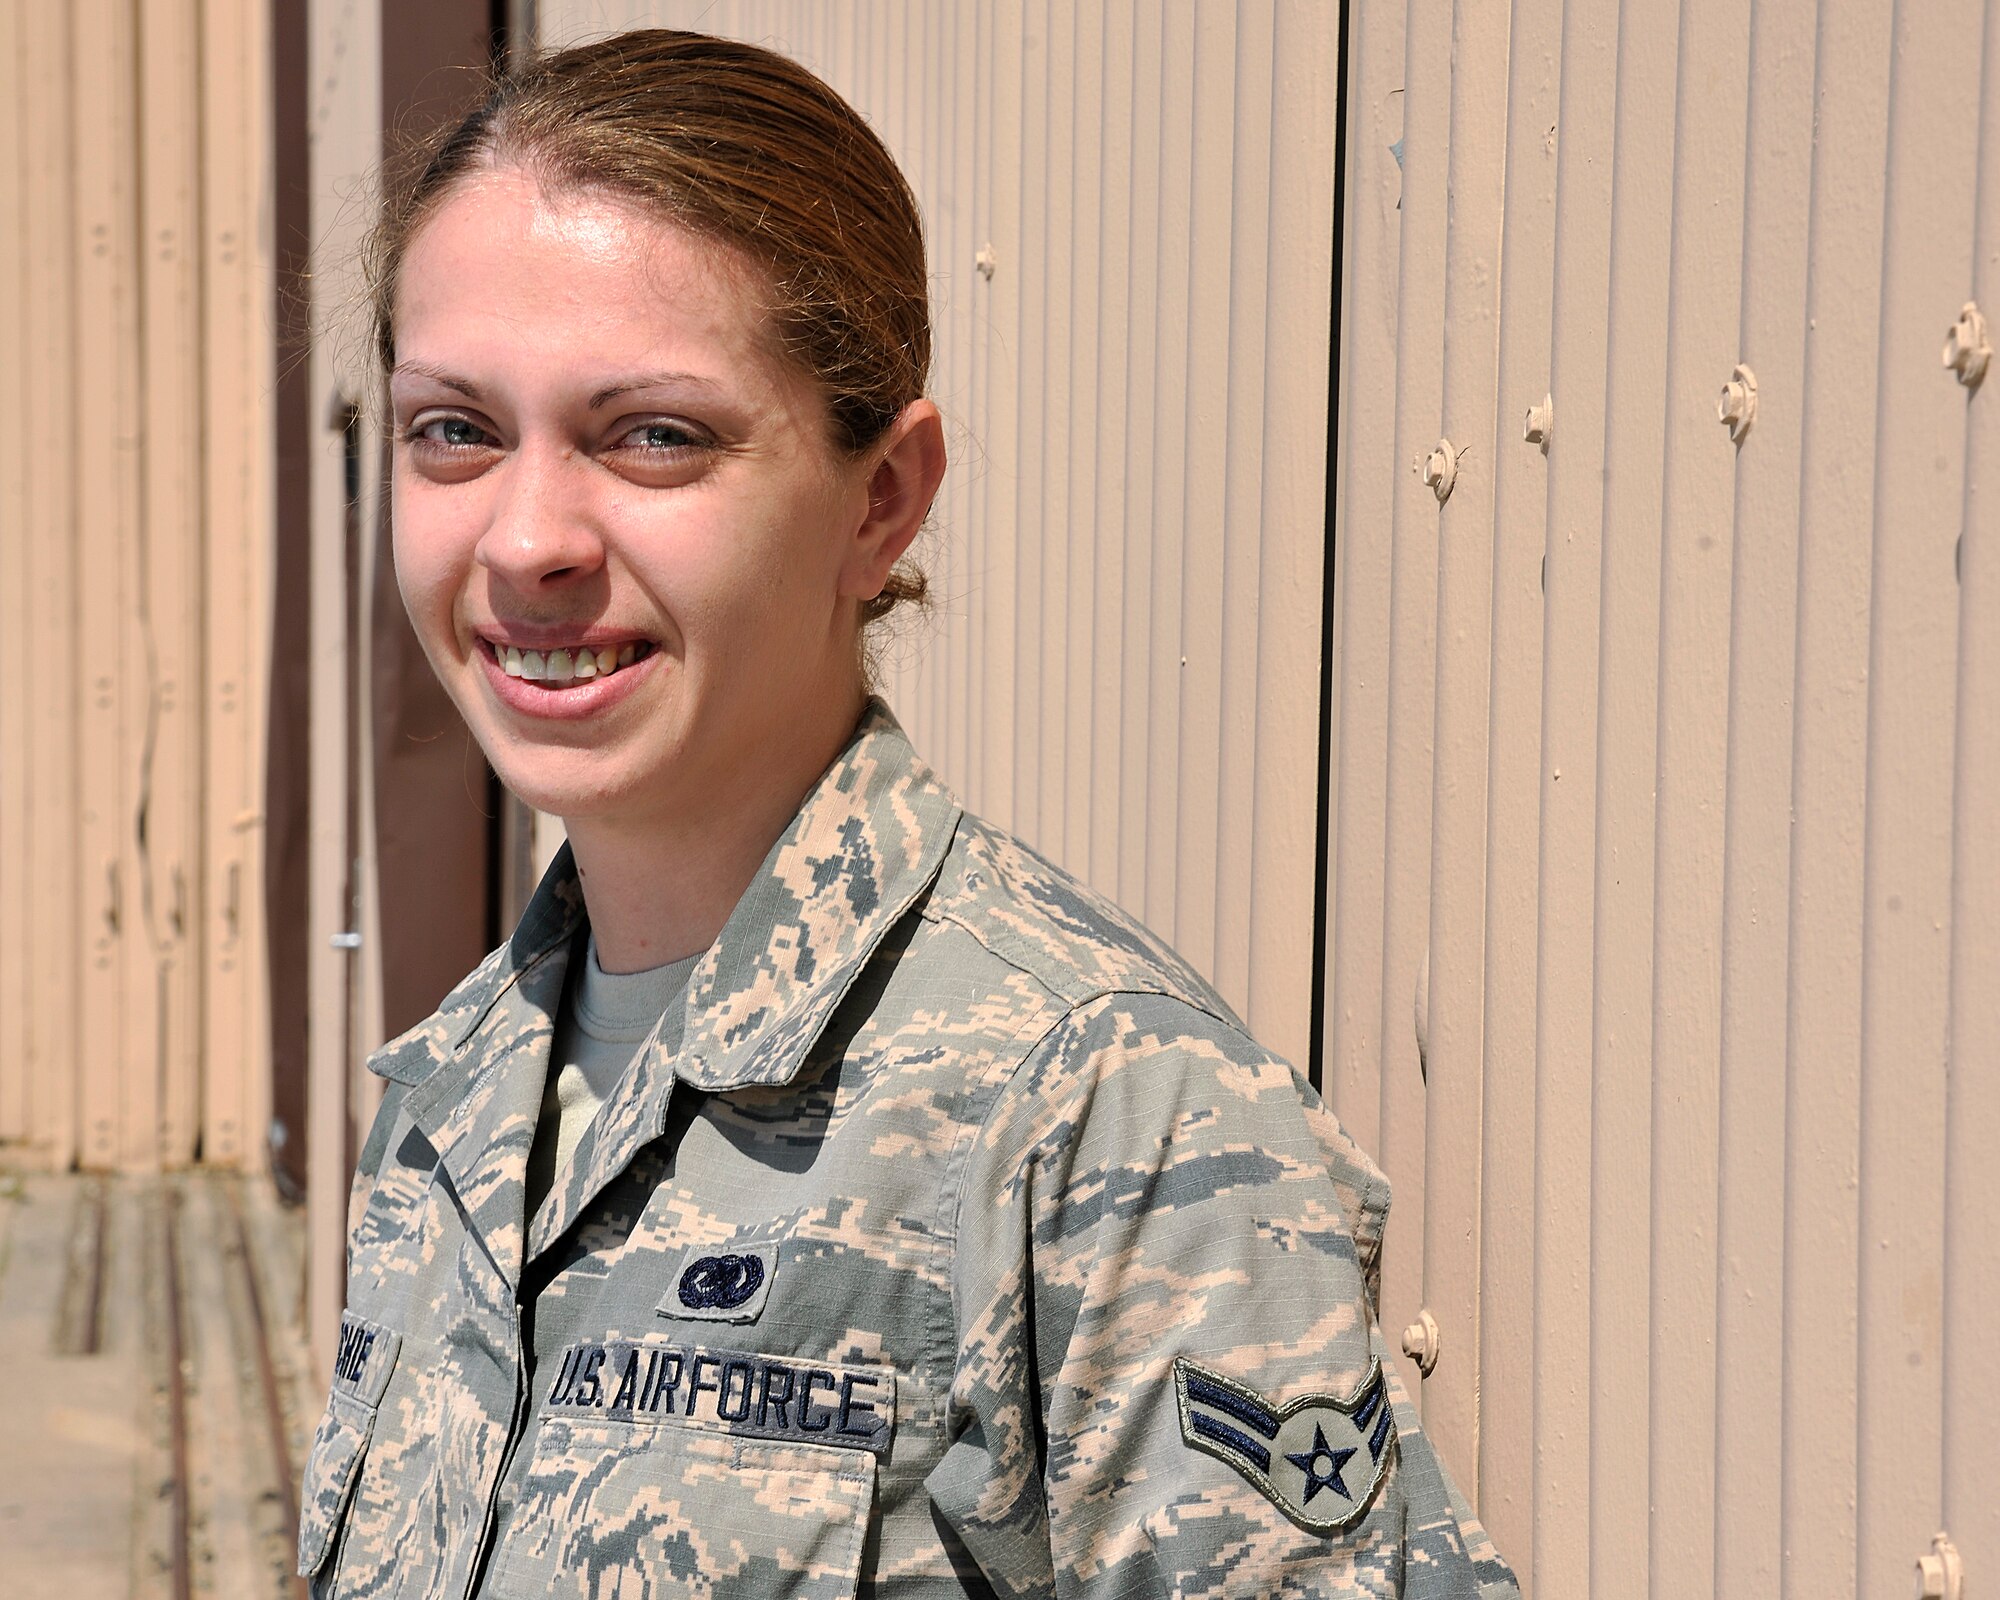 Airman 1st Class Diamand Ritchie, 319th Logistics Readiness Squadron logistics planner apprentice, stands in front of building 523 June 25, 2015 on Grand Forks Air Force Base, N.D. Ritchie, an Auburn native, was selected as the Warrior of the Week for the last week of June 2015. (U.S. Air Force photo by Senior Airman Xavier Navarro/released)